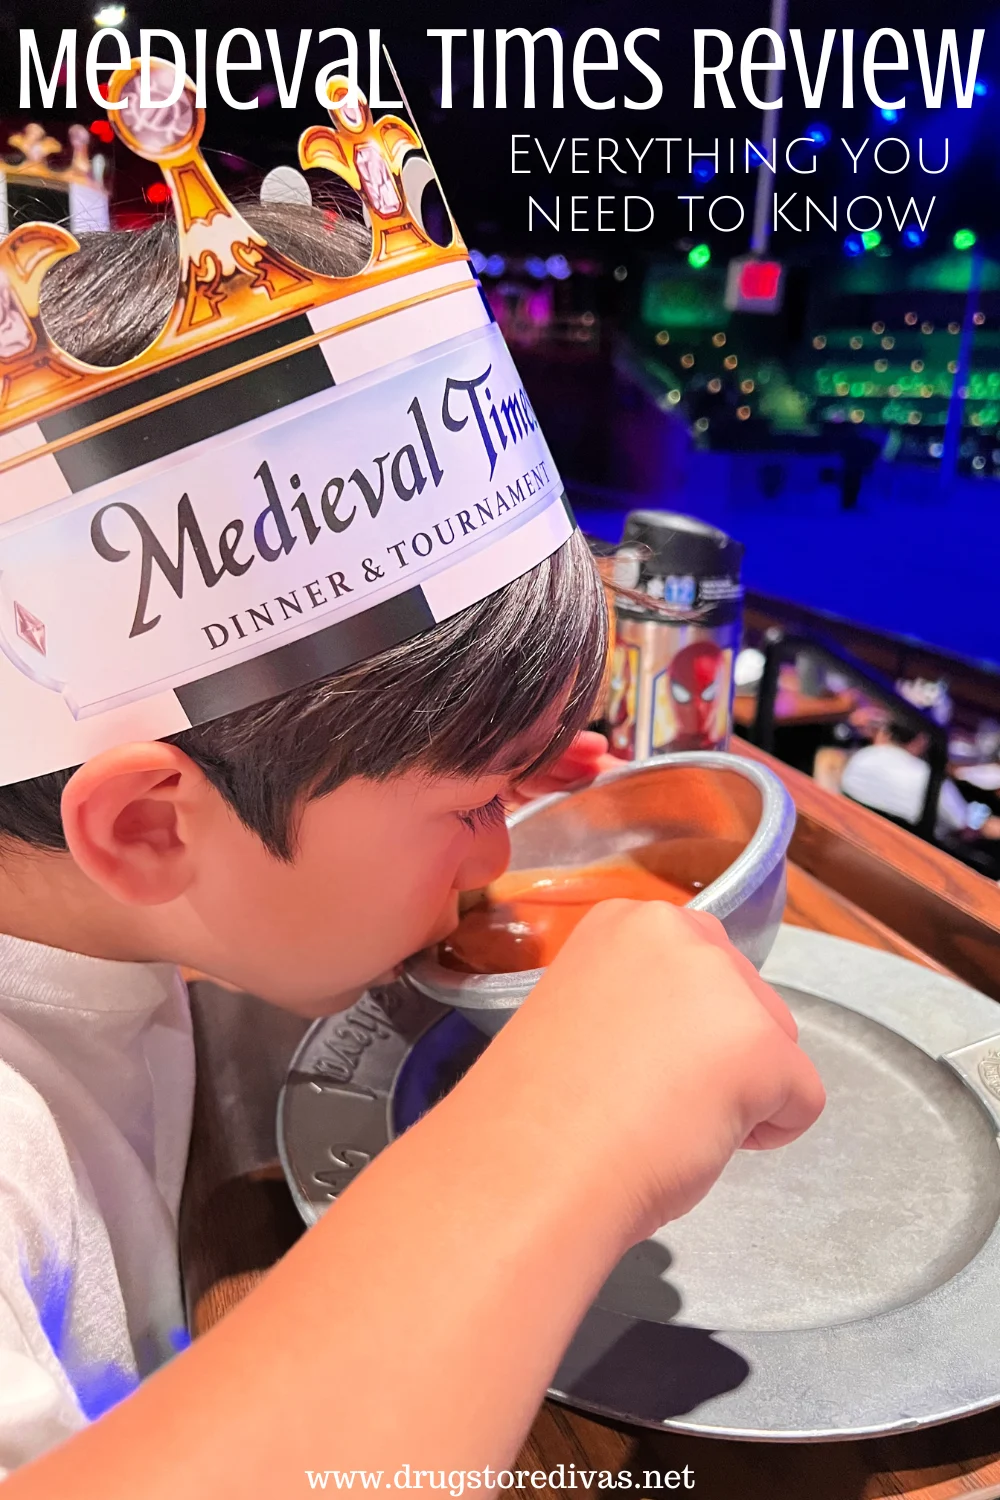 A little boy wearing a crown and drinking tomato soup with the words 